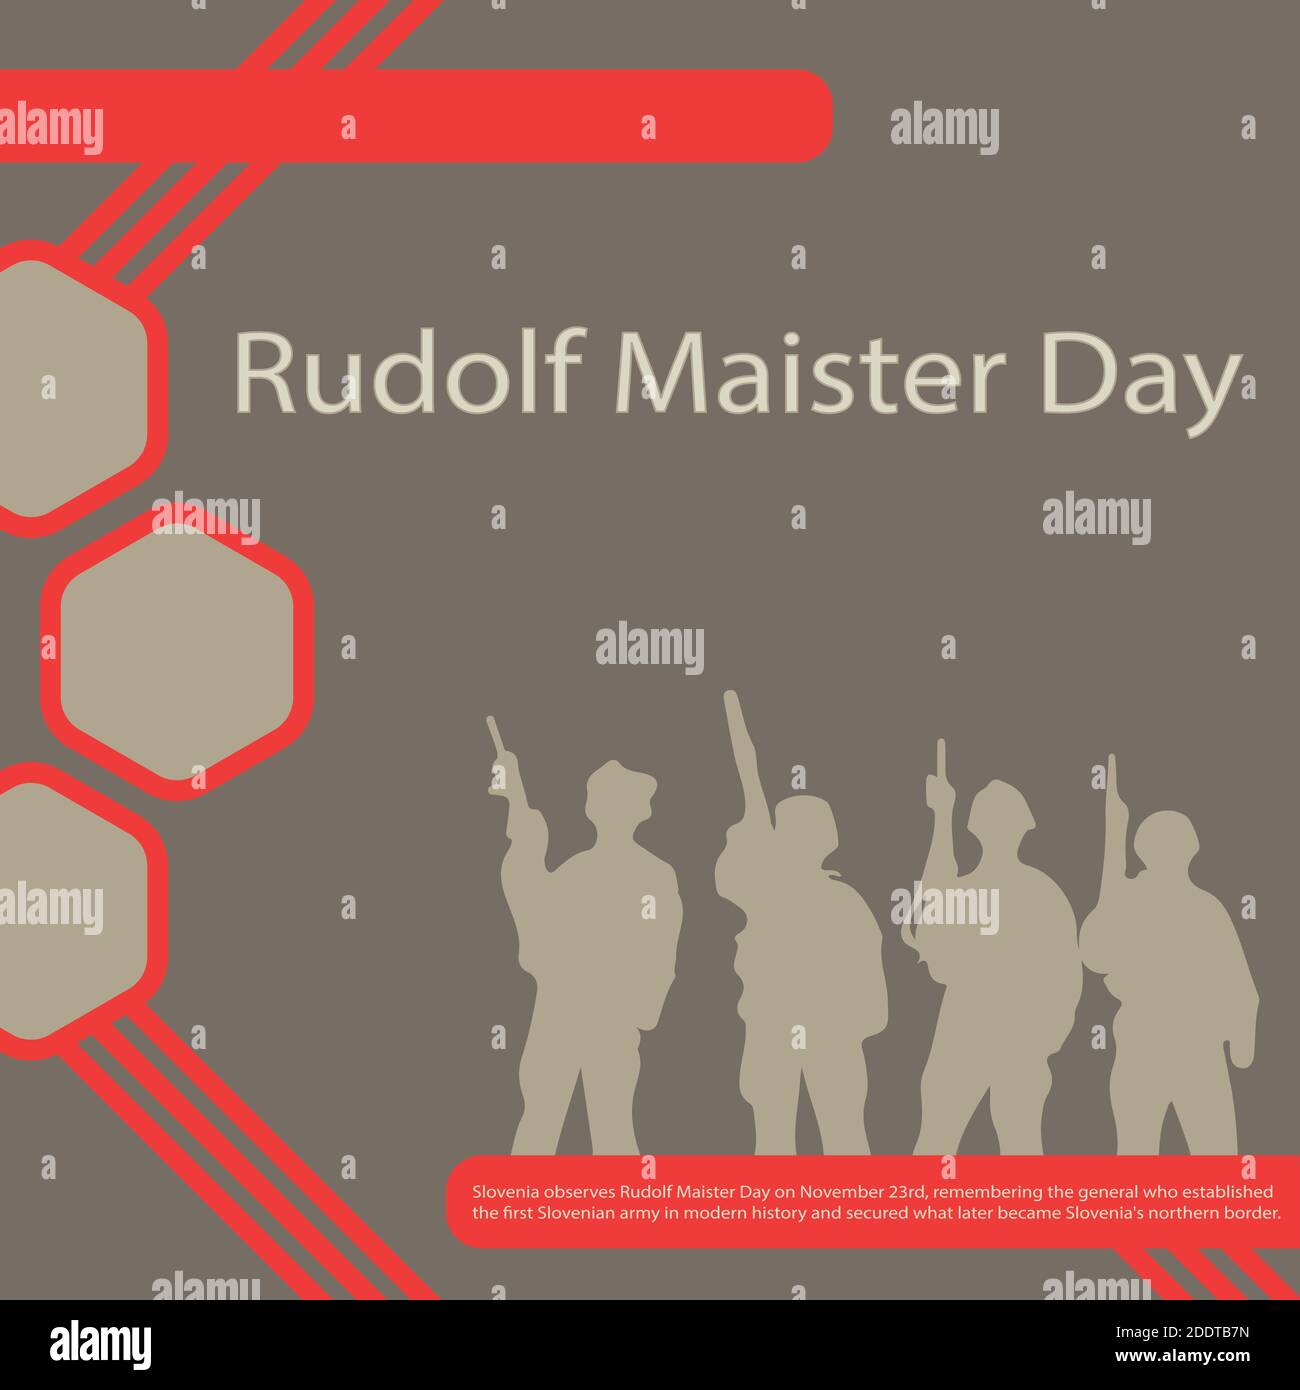 Slovenia observes Rudolf Maister Day on November 23rd, remembering the general who established the first Slovenian army in modern history and secured Stock Vector